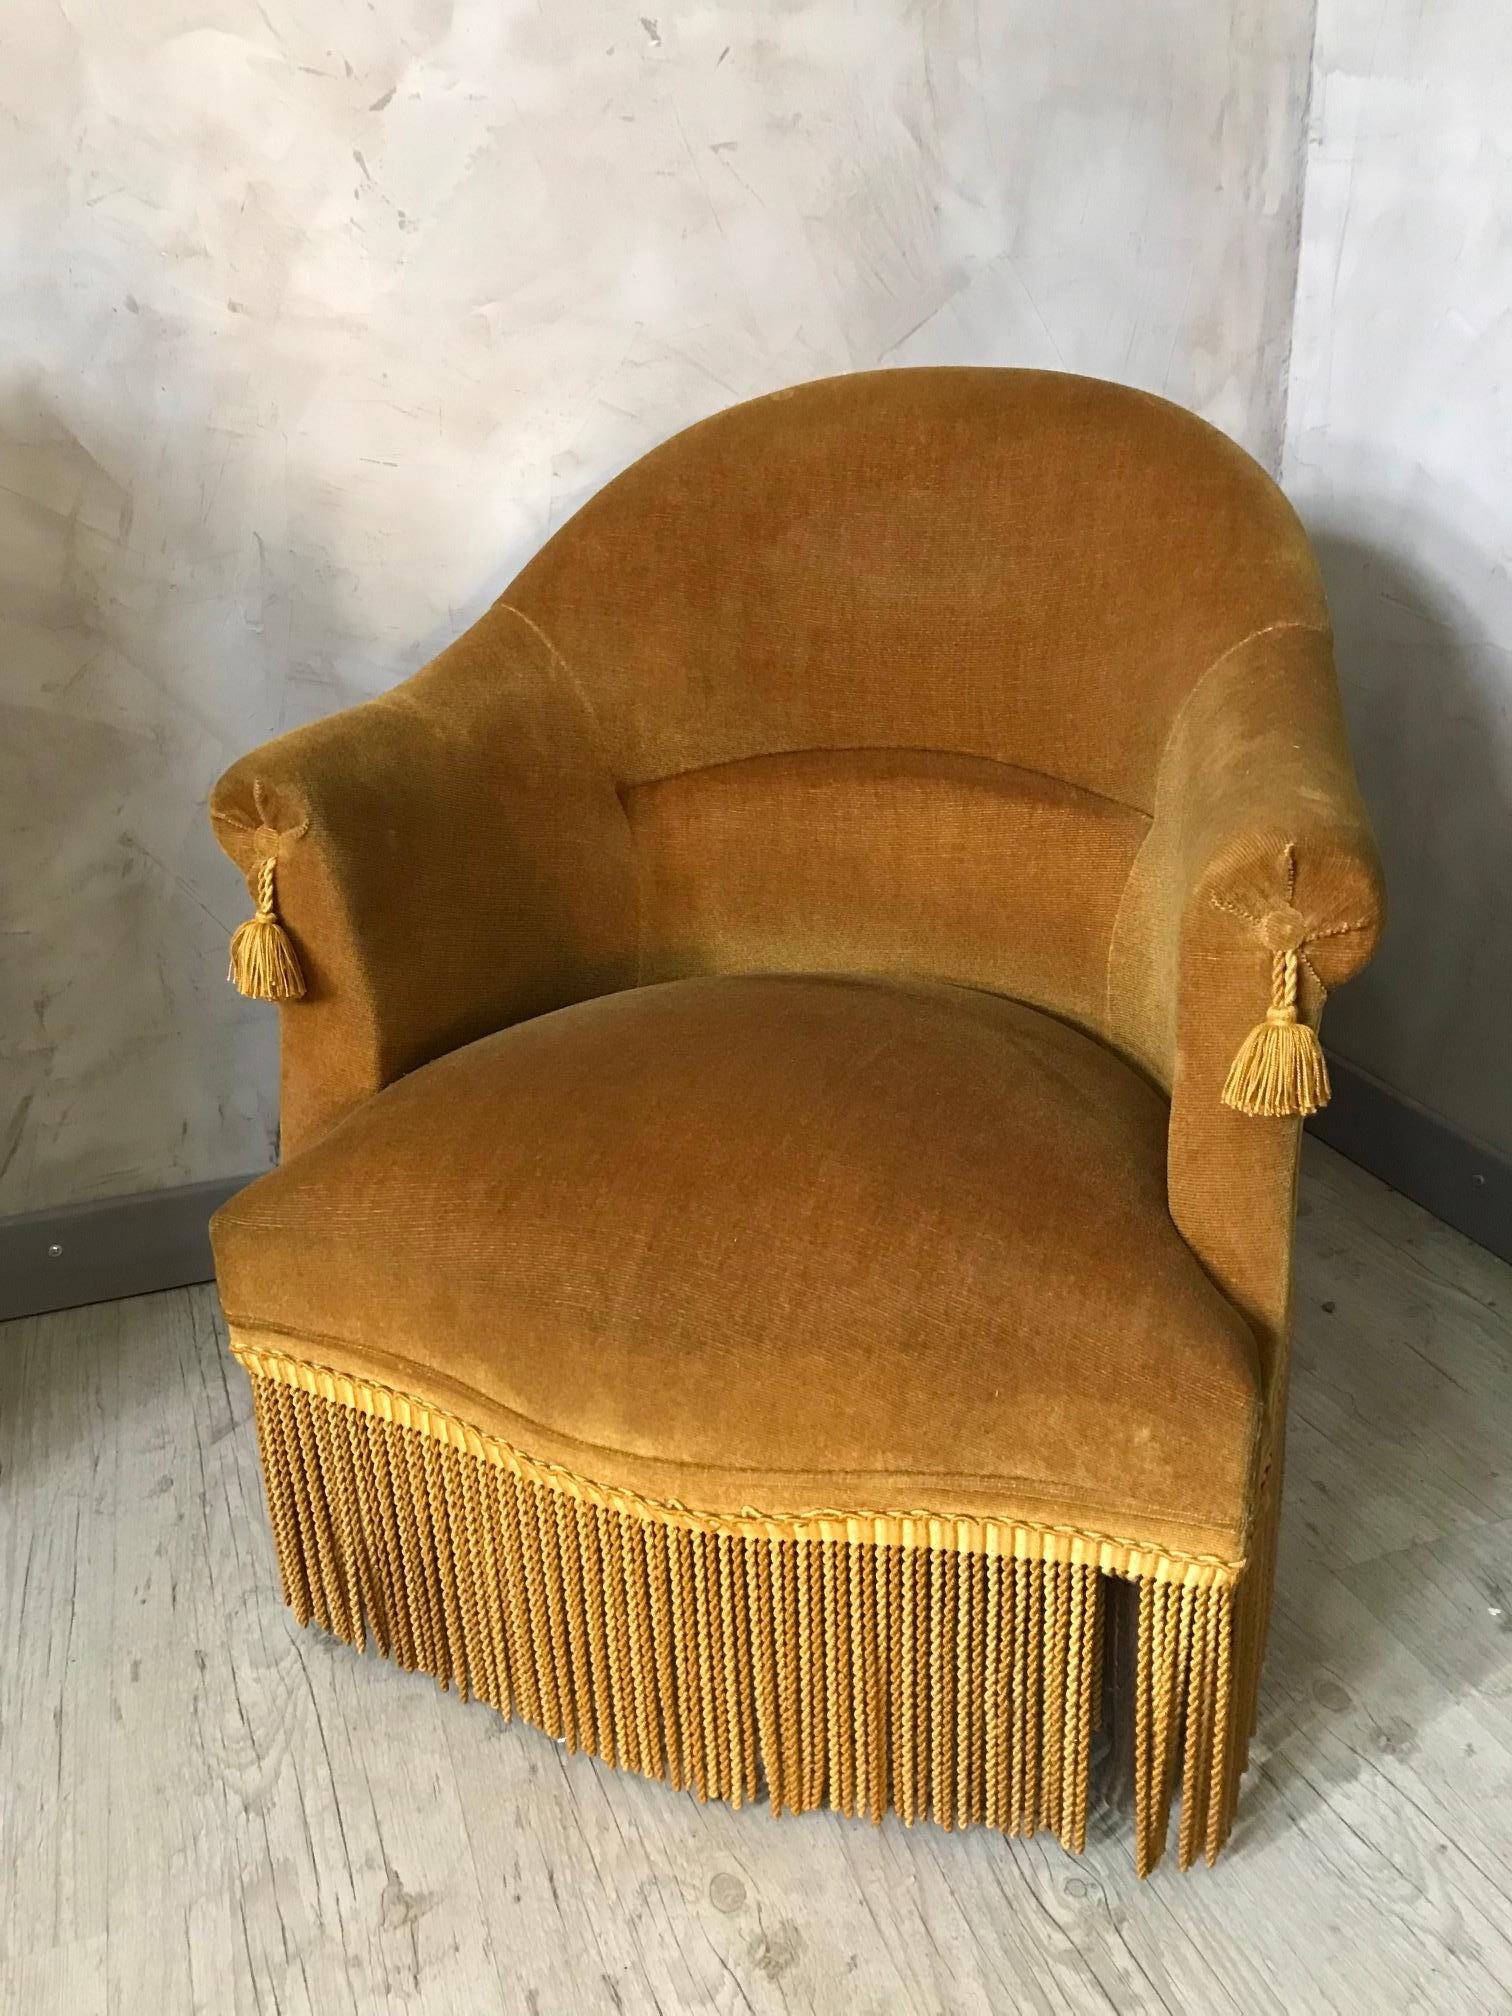 Very nice 20th century French yellow velvet crapaud armchair from the 1940s.
Very comfortable. Fringes and nice velvet. Good condition.
Wooden base.